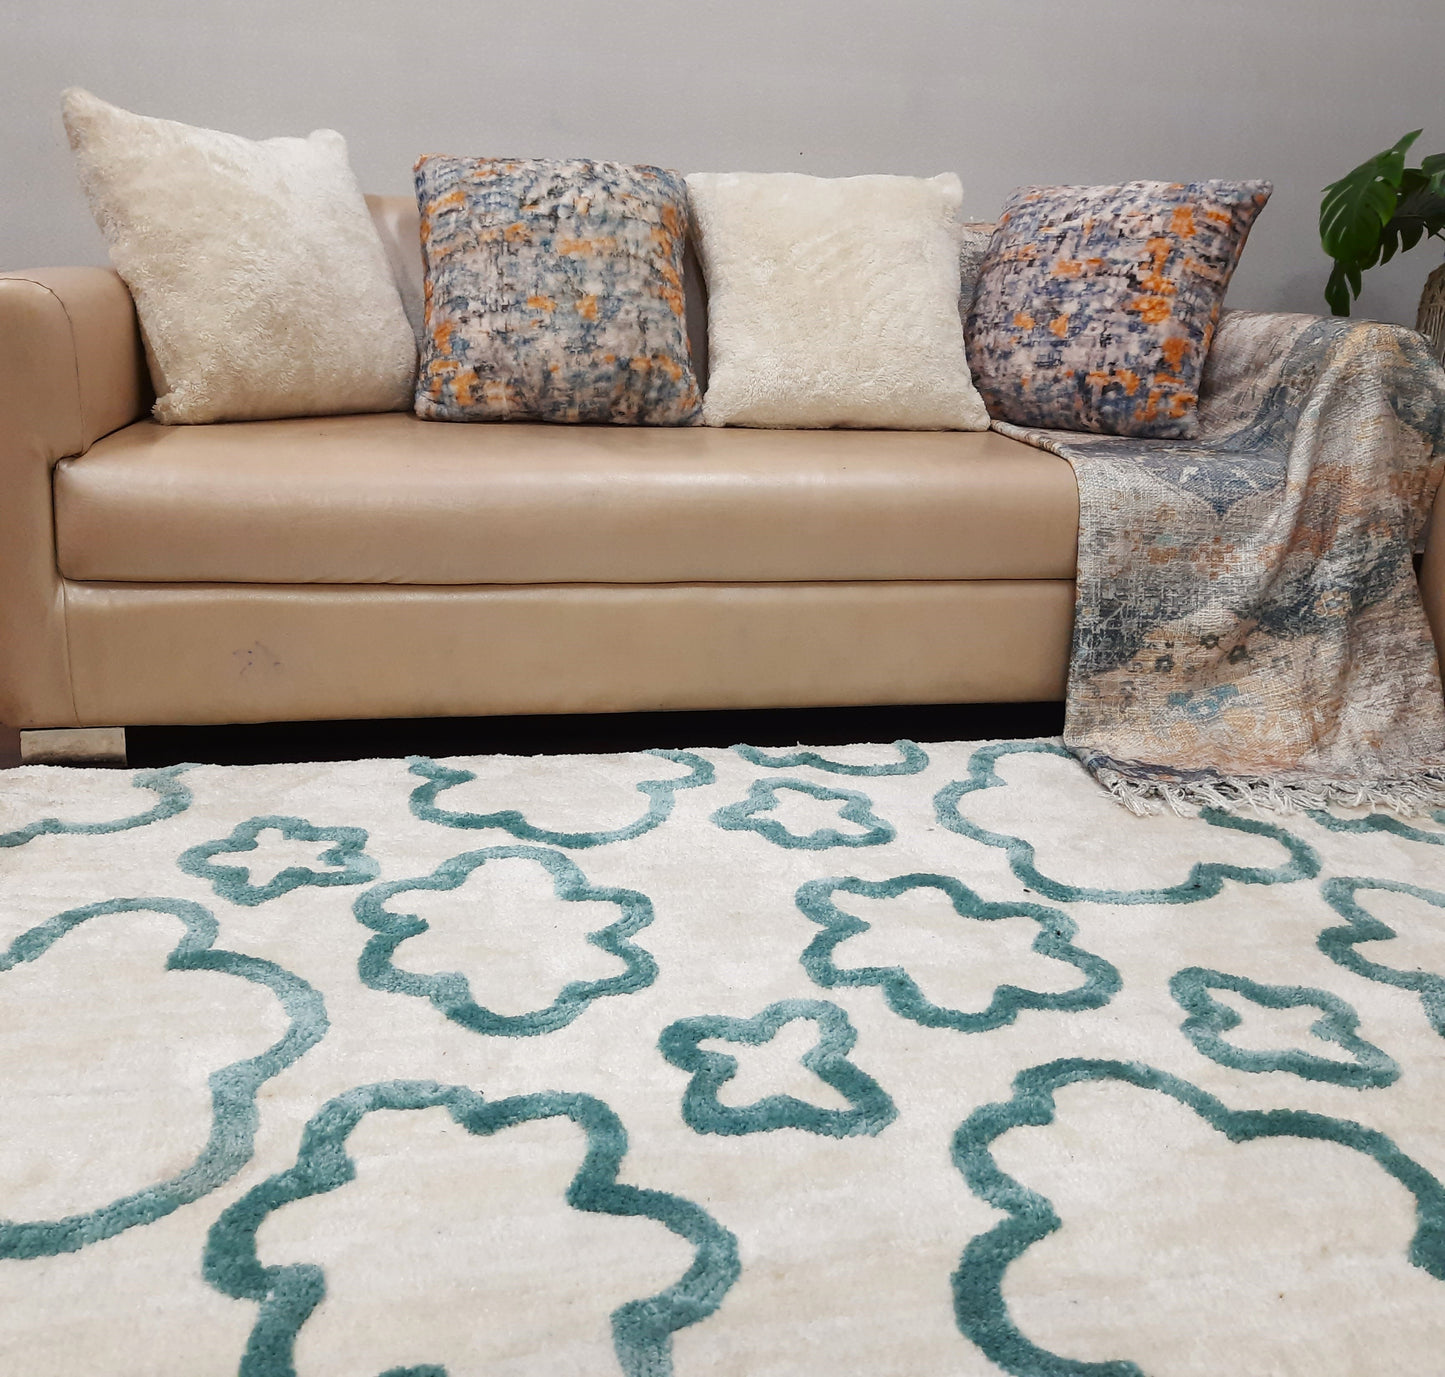 Avioni Home Atlas Collection - Plush Soft Washable Carpet In Aqua Blue & Ivory| Soft, Easy to Clean